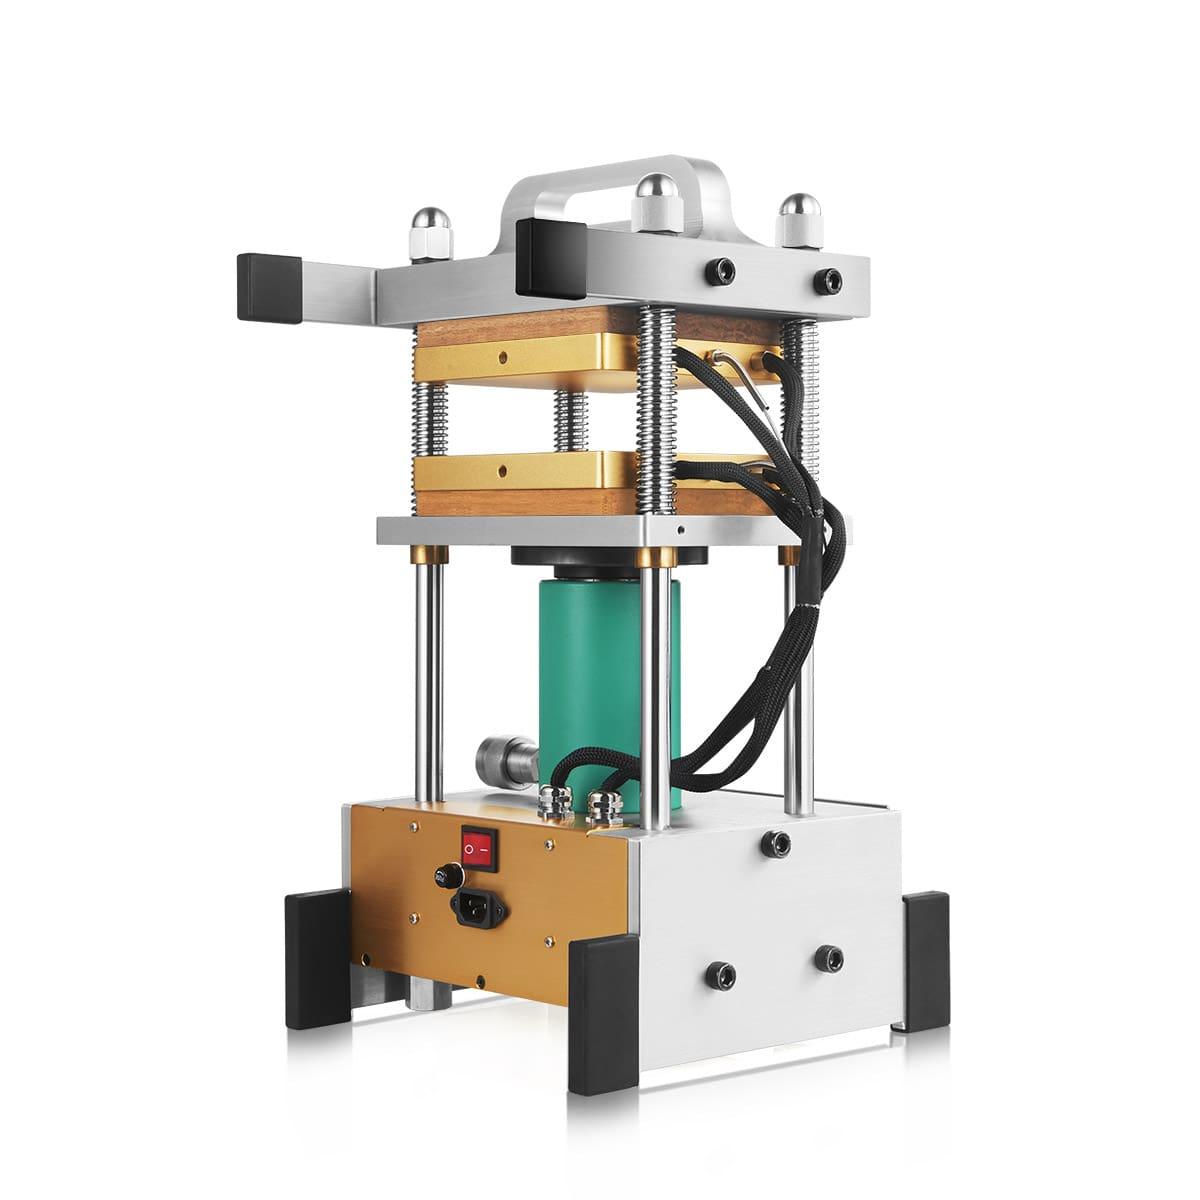 Dabpress 20 Ton Industrial Rosin Press - 7x7" Heated Platens, 4 Heating Rods - No Hydraulic Pump Included But Required - ROSITEK